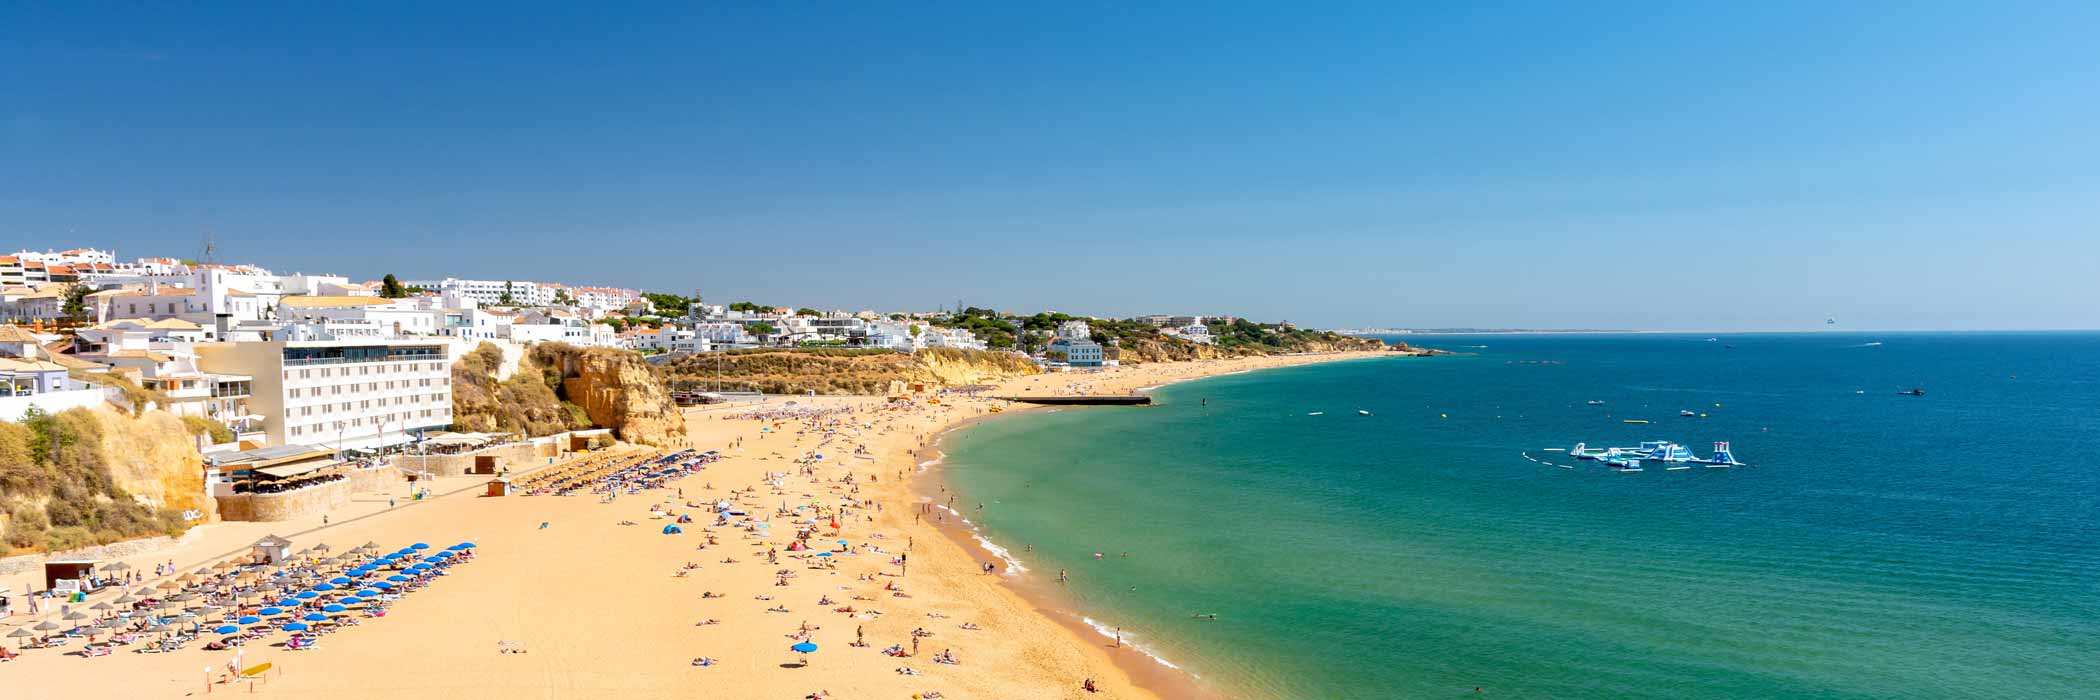 Holidays to Algarve from Newcastle